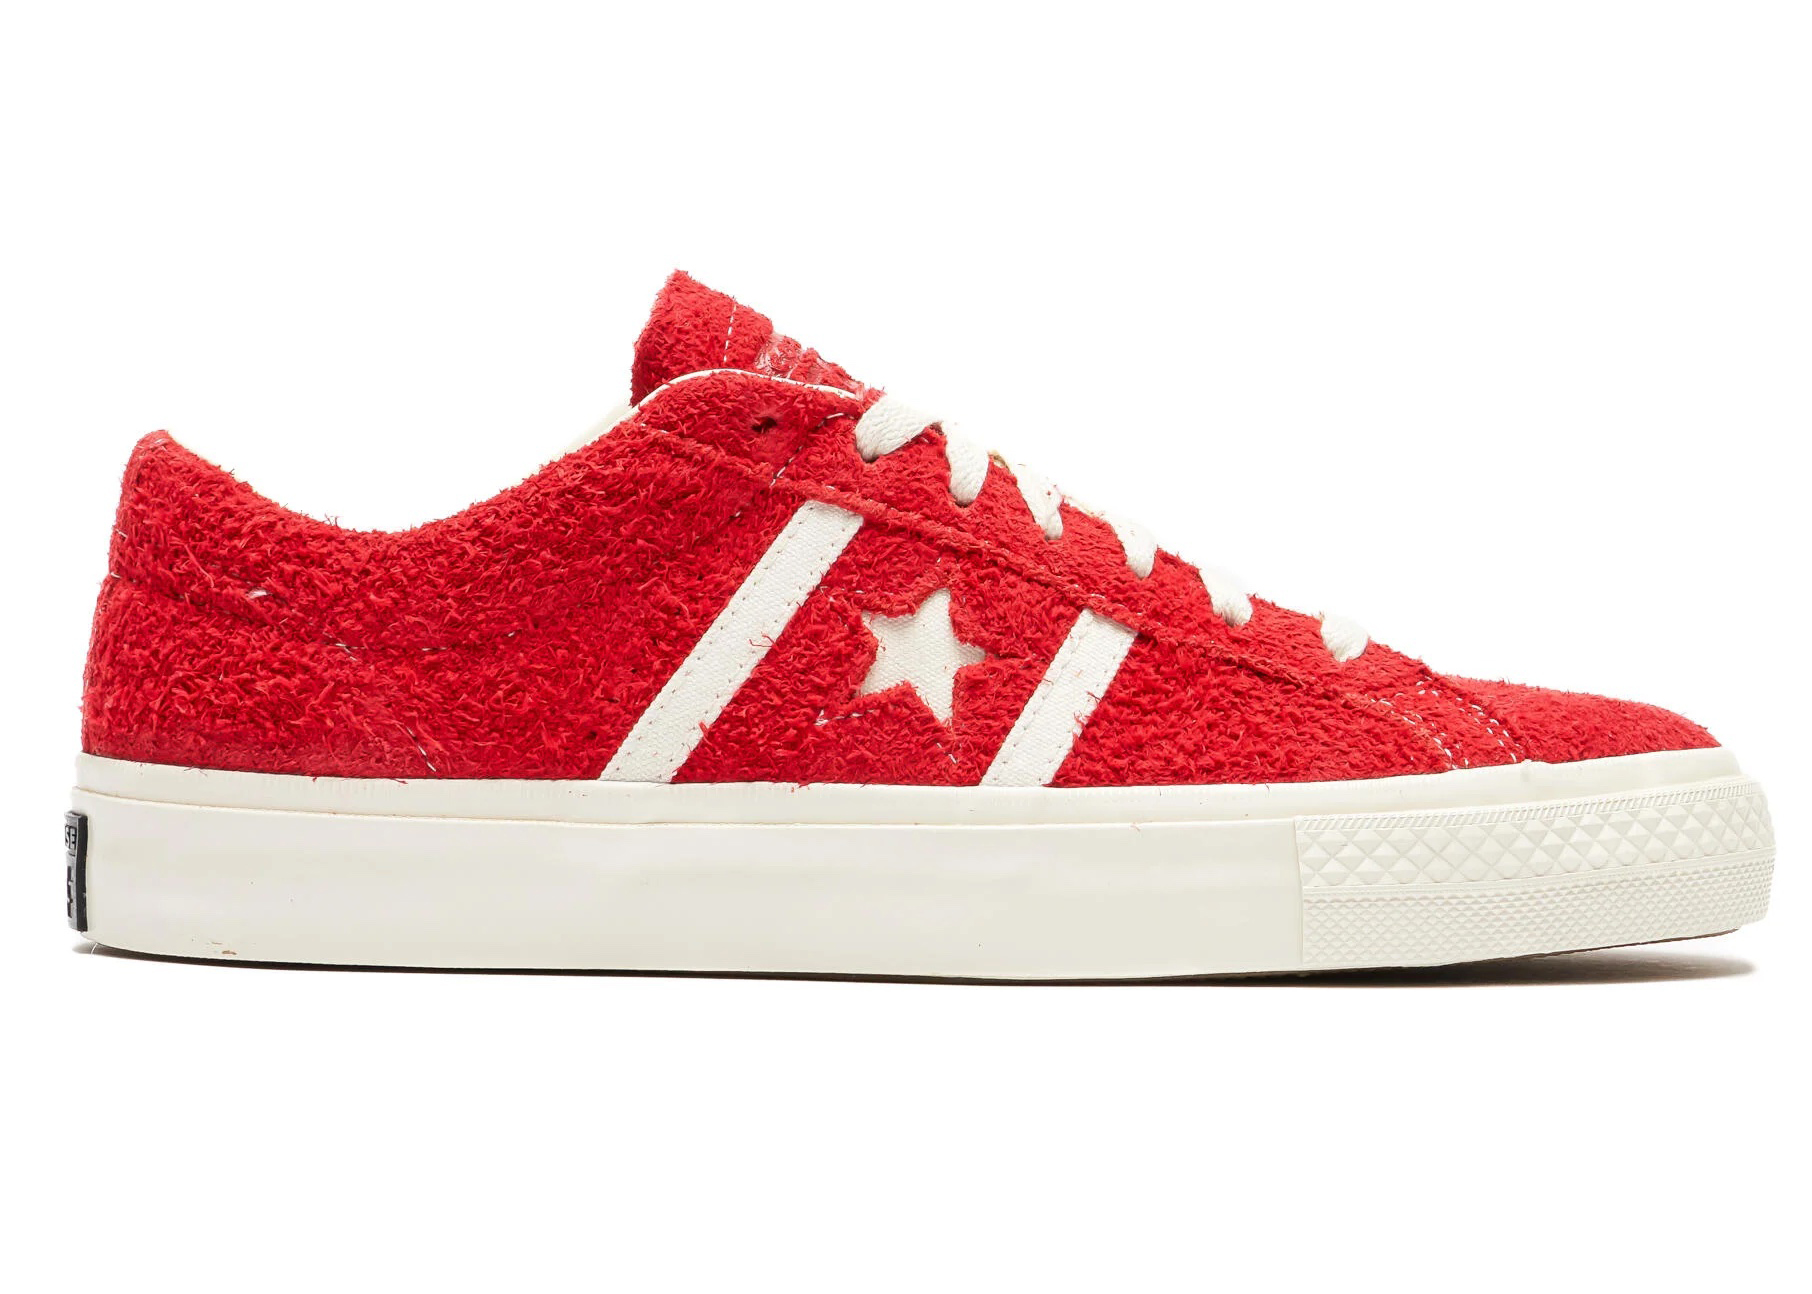 Converse One Star Academy Pro Ox Sunflower Gold メンズ - A06425C - JP